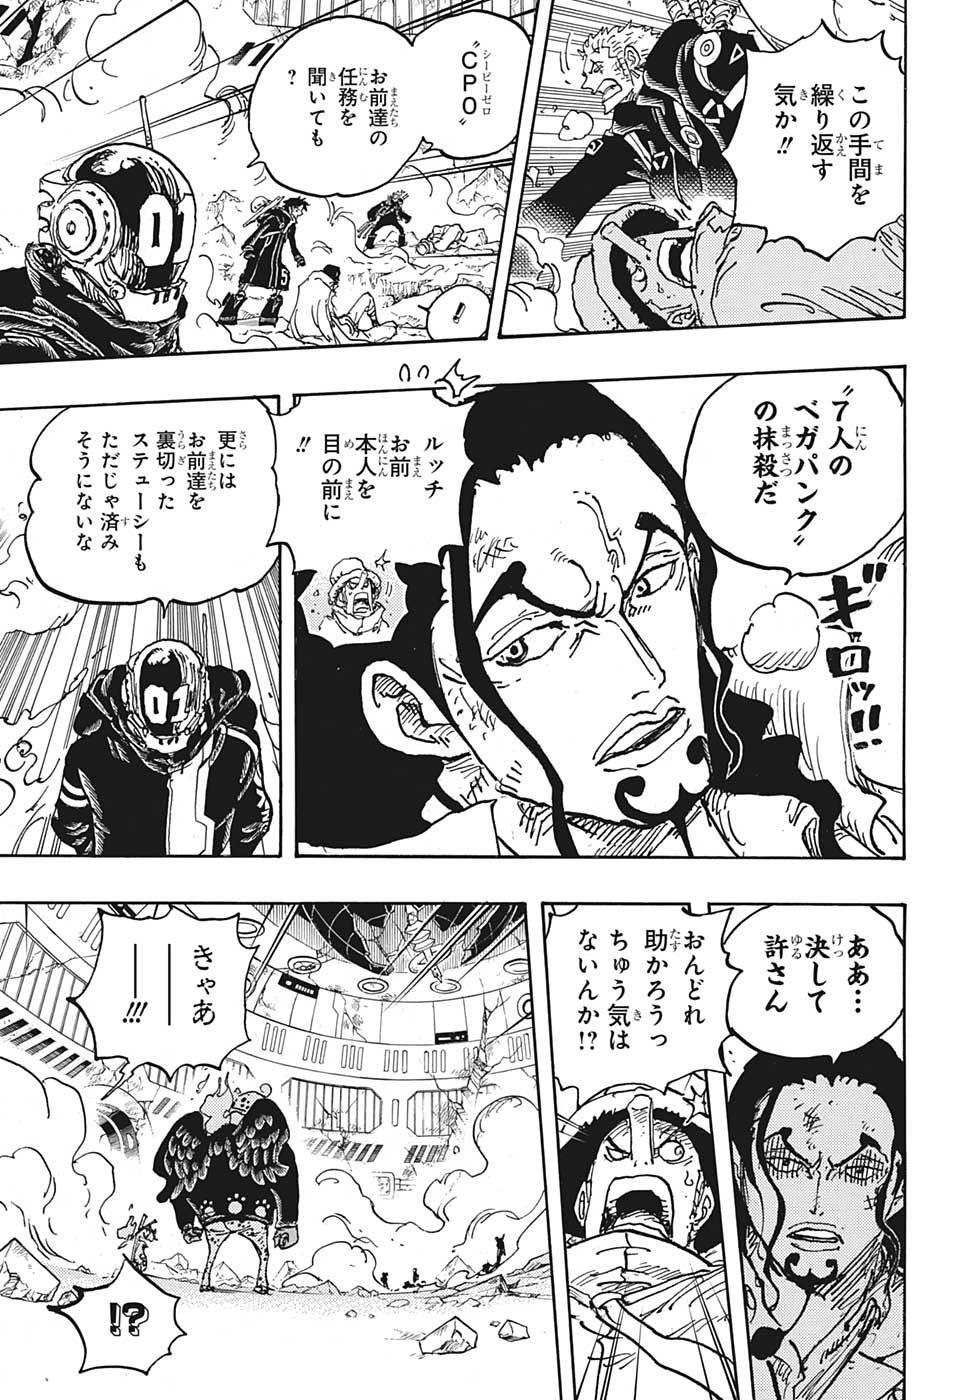 One Piece - Chapter 1076 - Page 3